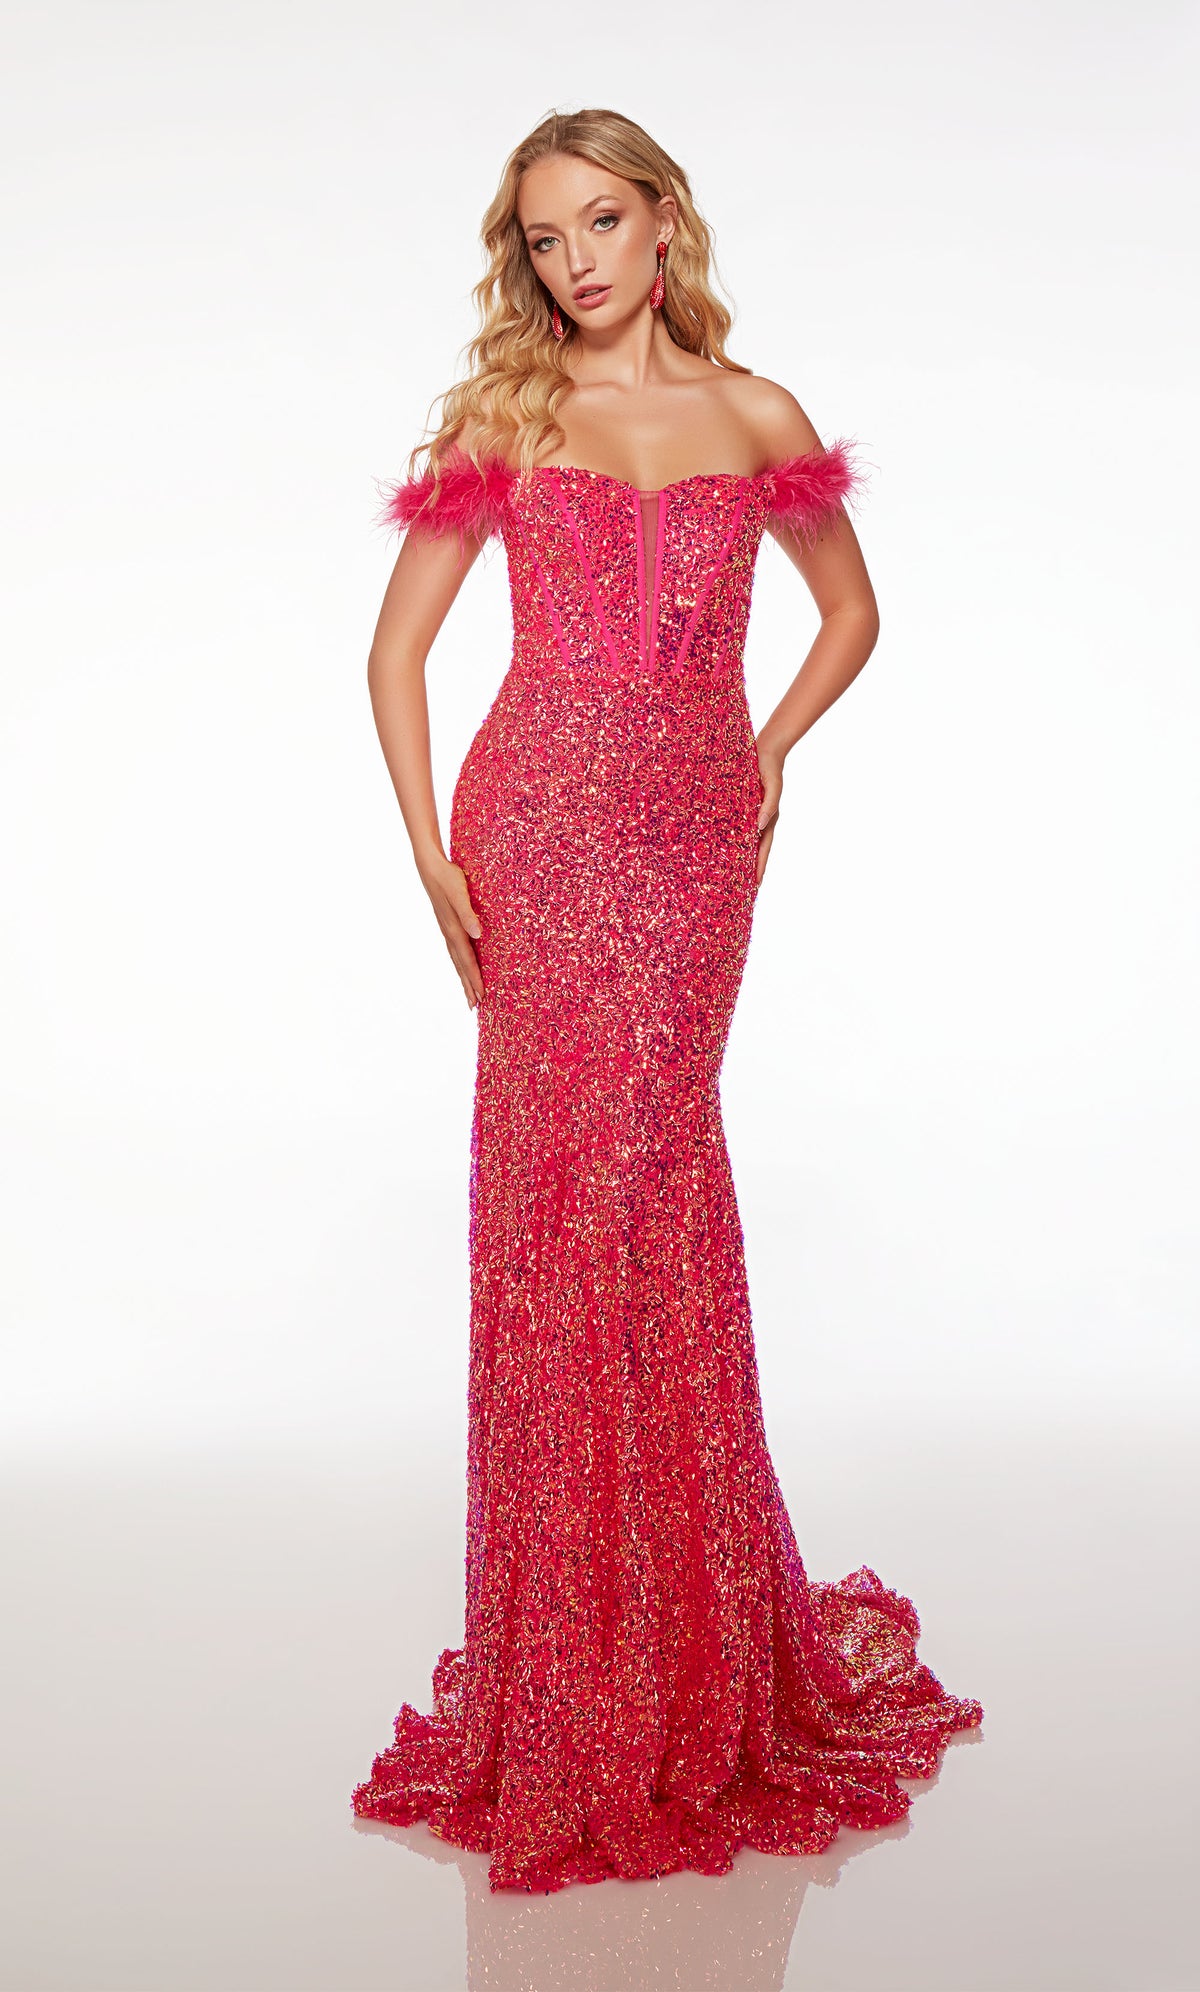 Off-the-shoulder pink mermaid dress featuring detachable feather sleeves, corset top, zip-up back, and an long train for an stylish and elegant ensemble.